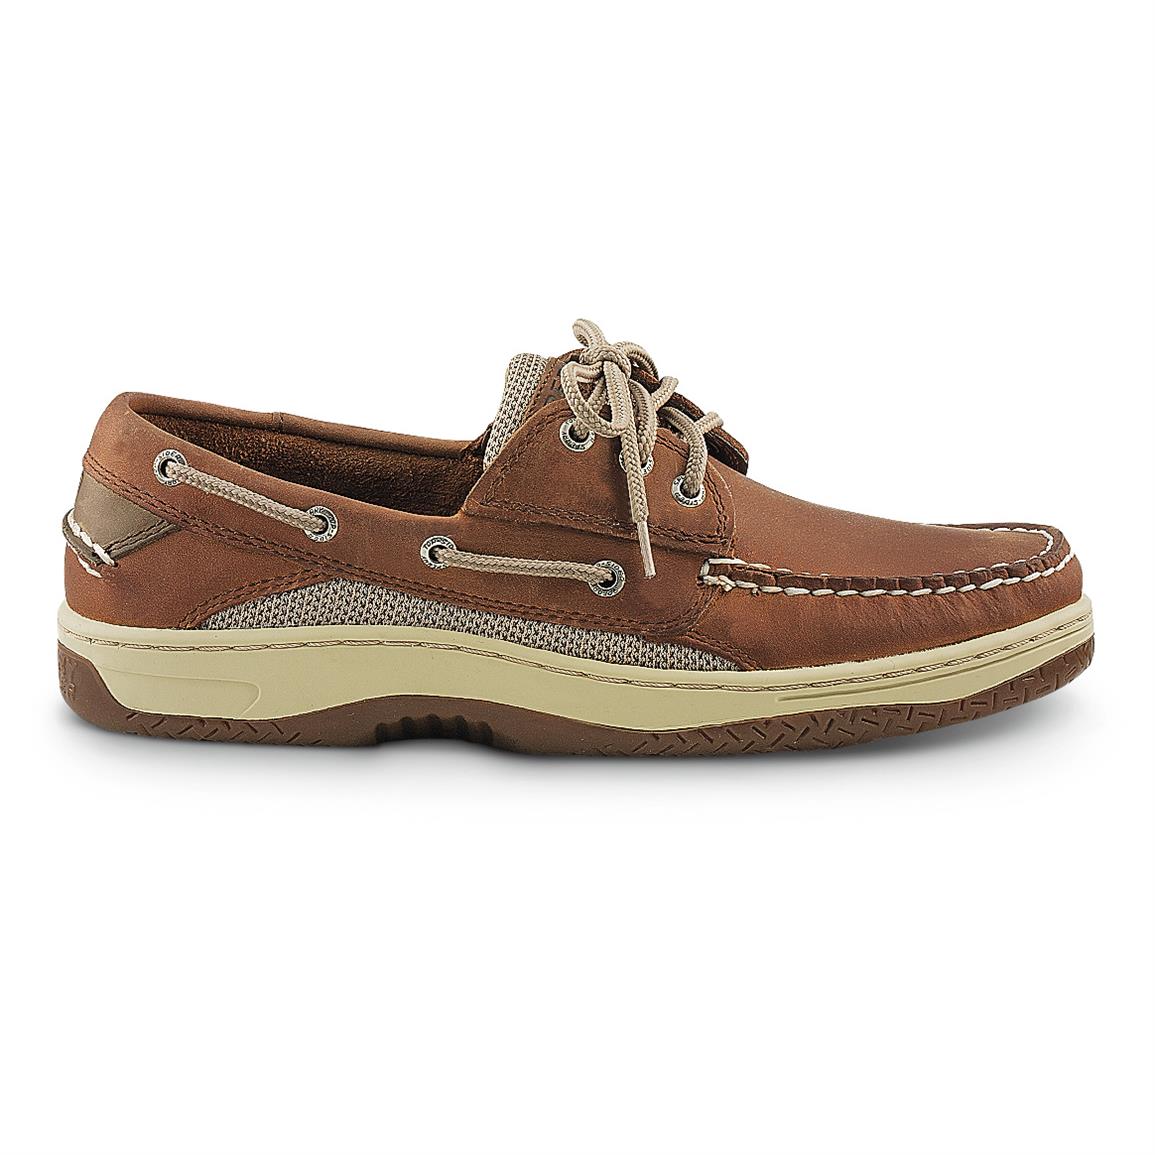 Sperry Men's Billfish 3-Eye Boat Shoes - 669537, Boat & Water Shoes at ...